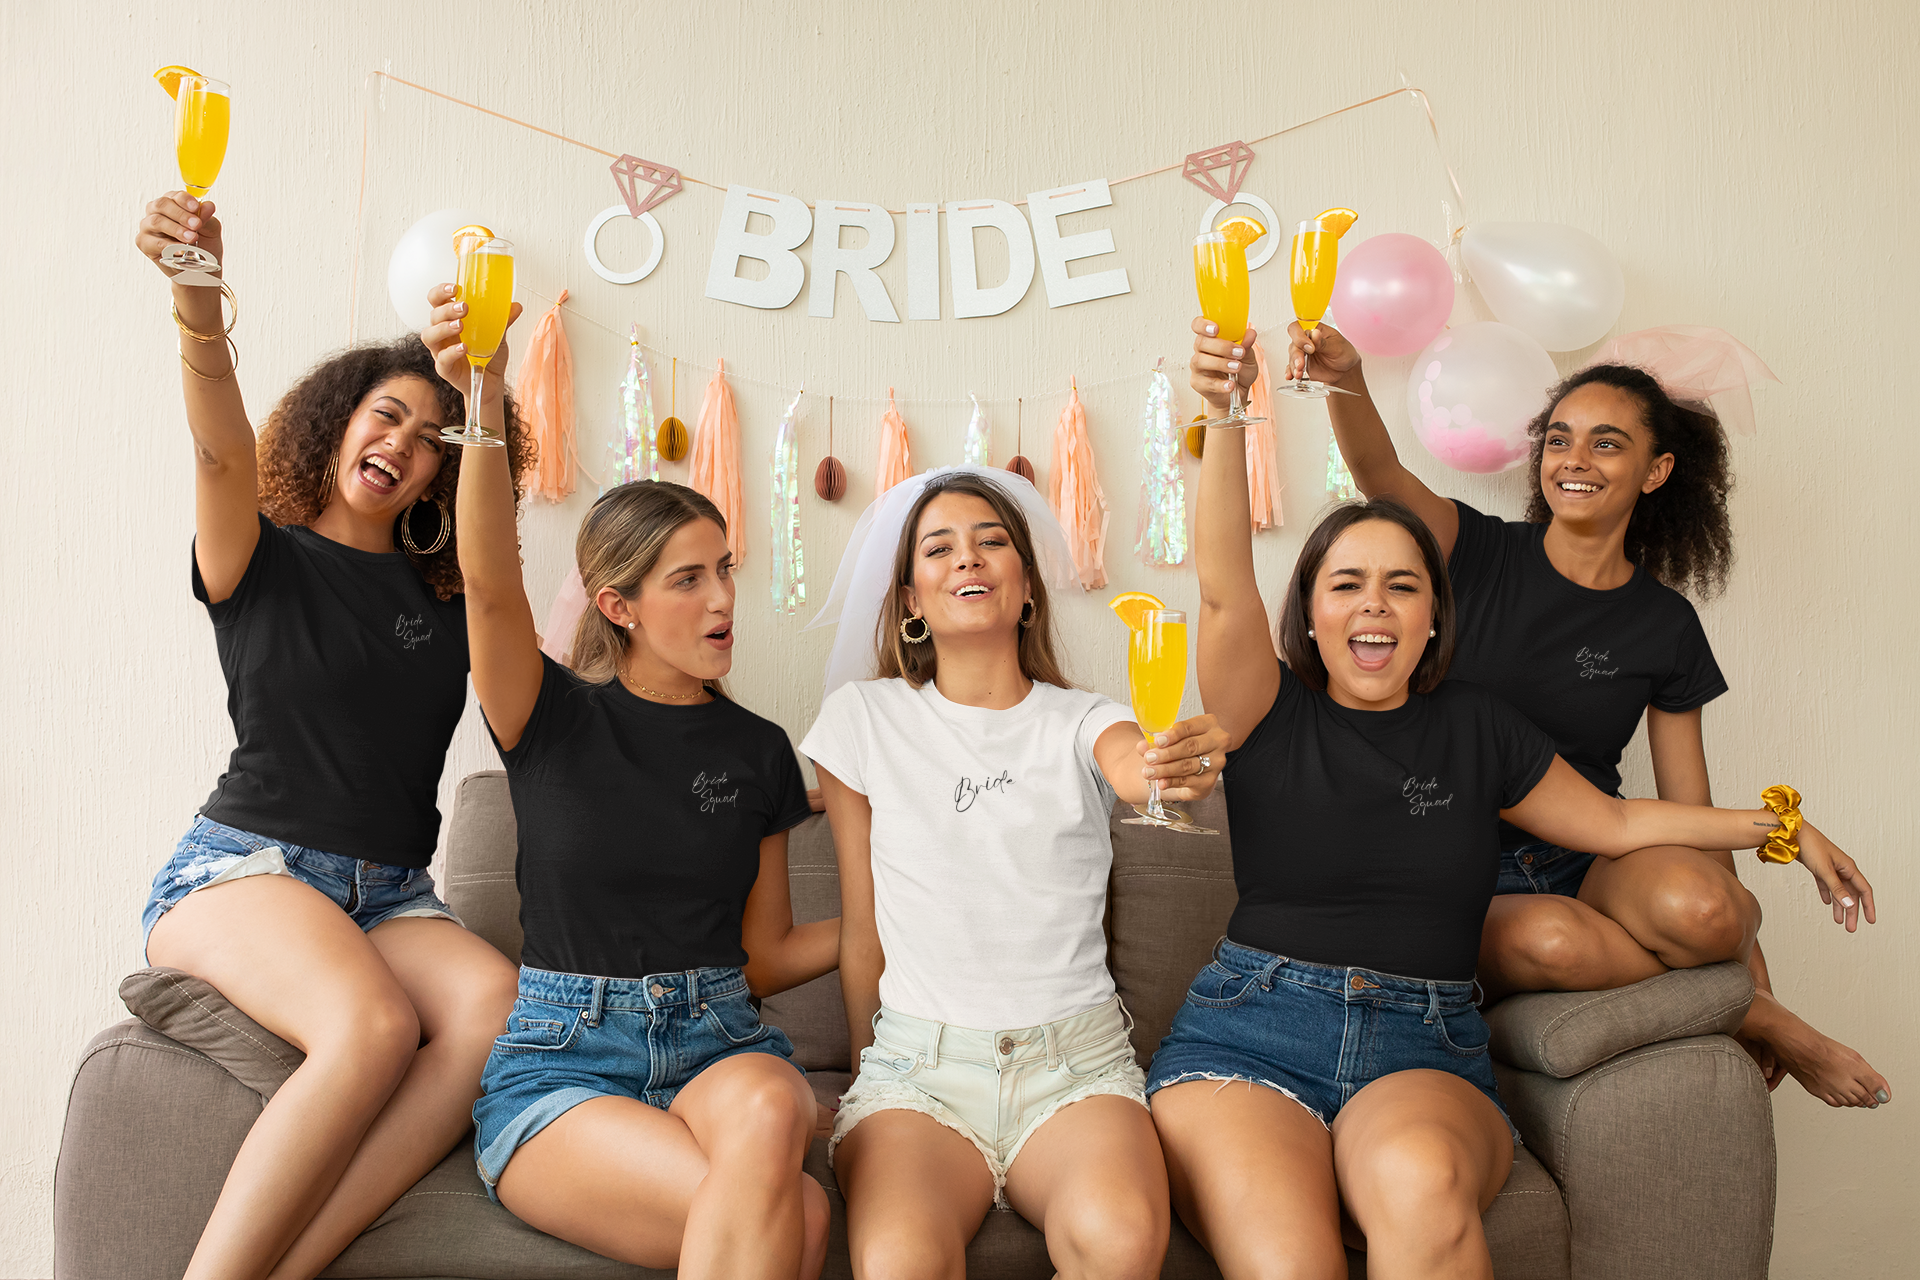 t-shirt-mockup-of-a-group-of-friends-cheering-on-a-bachelorette-party-29689_182f1966-8bd6-4626-9d4f-91e1b19a07b0.png